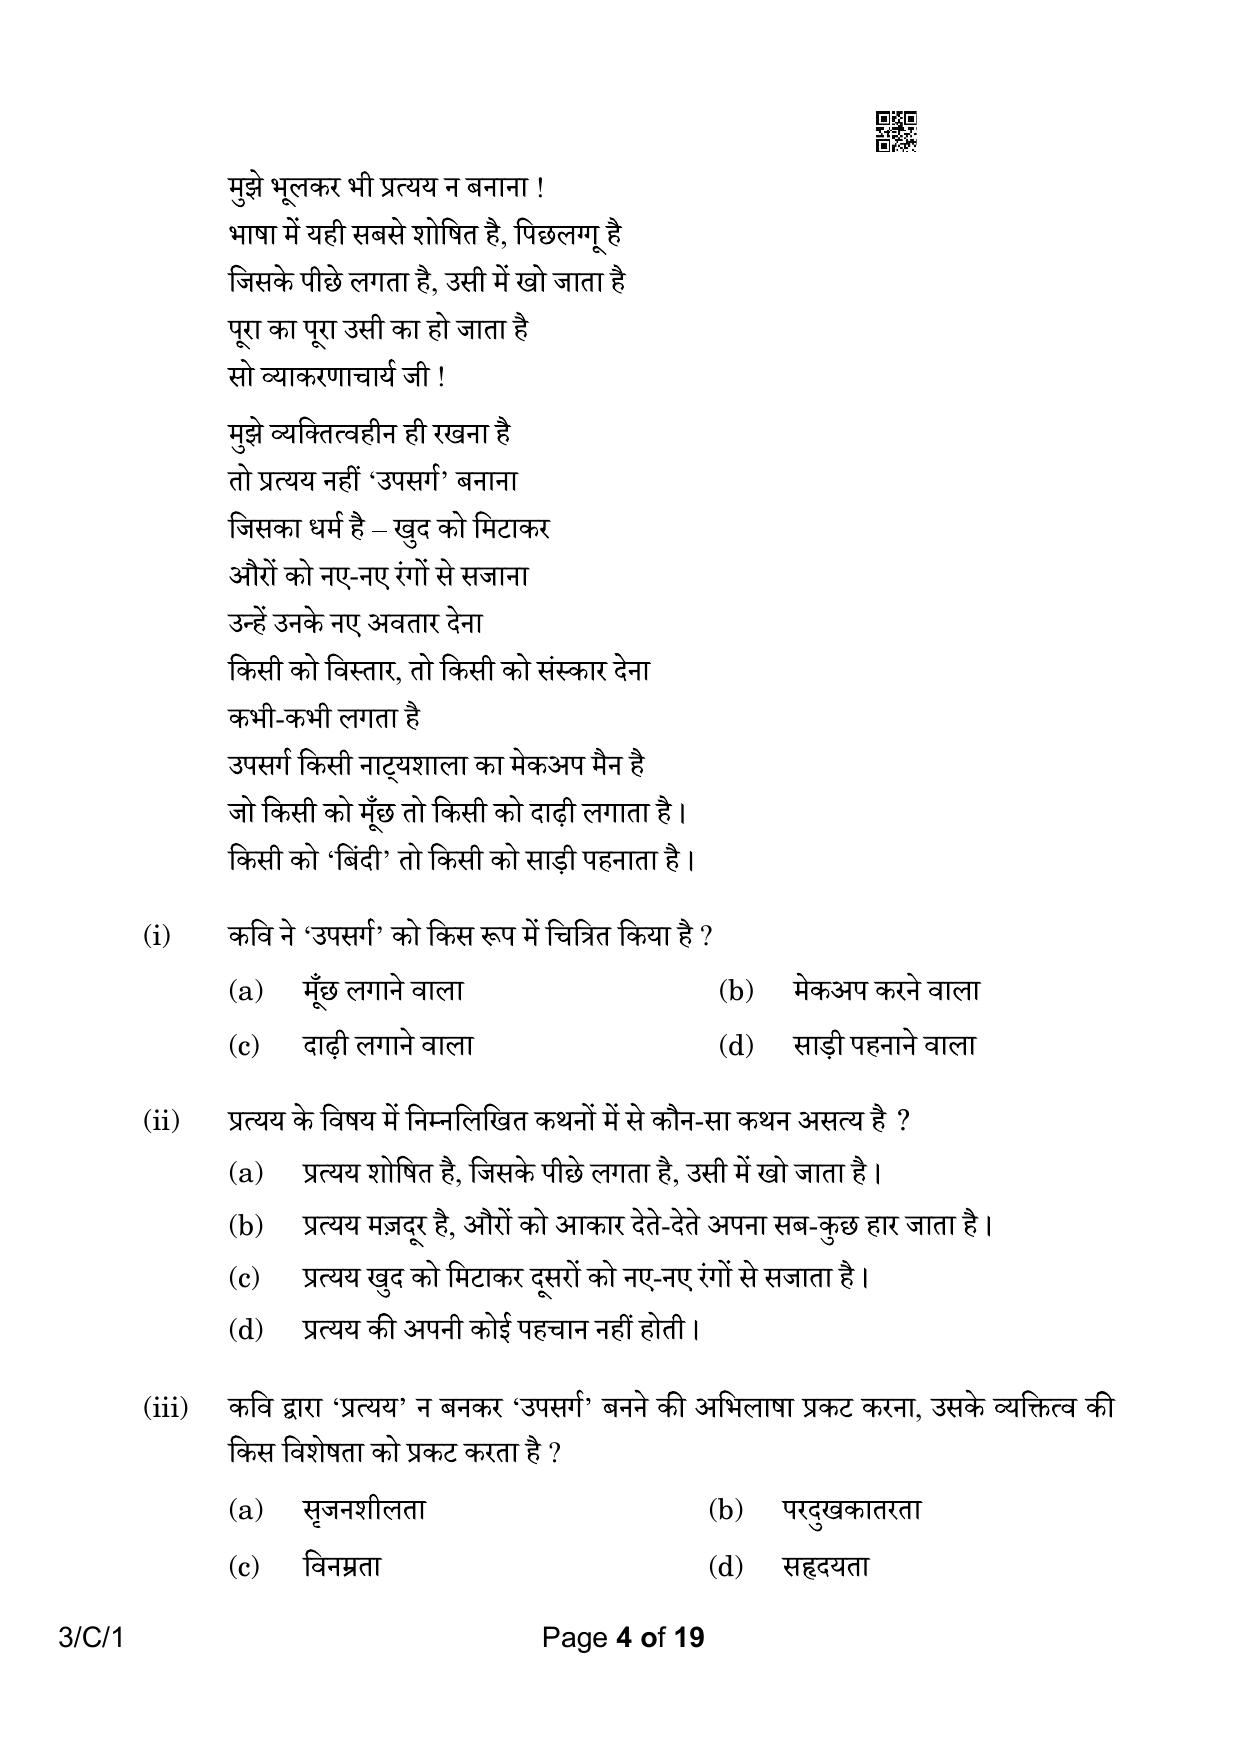 CBSE Class 10 3-1 Hindi A 2023 (Compartment) Question Paper - Page 4